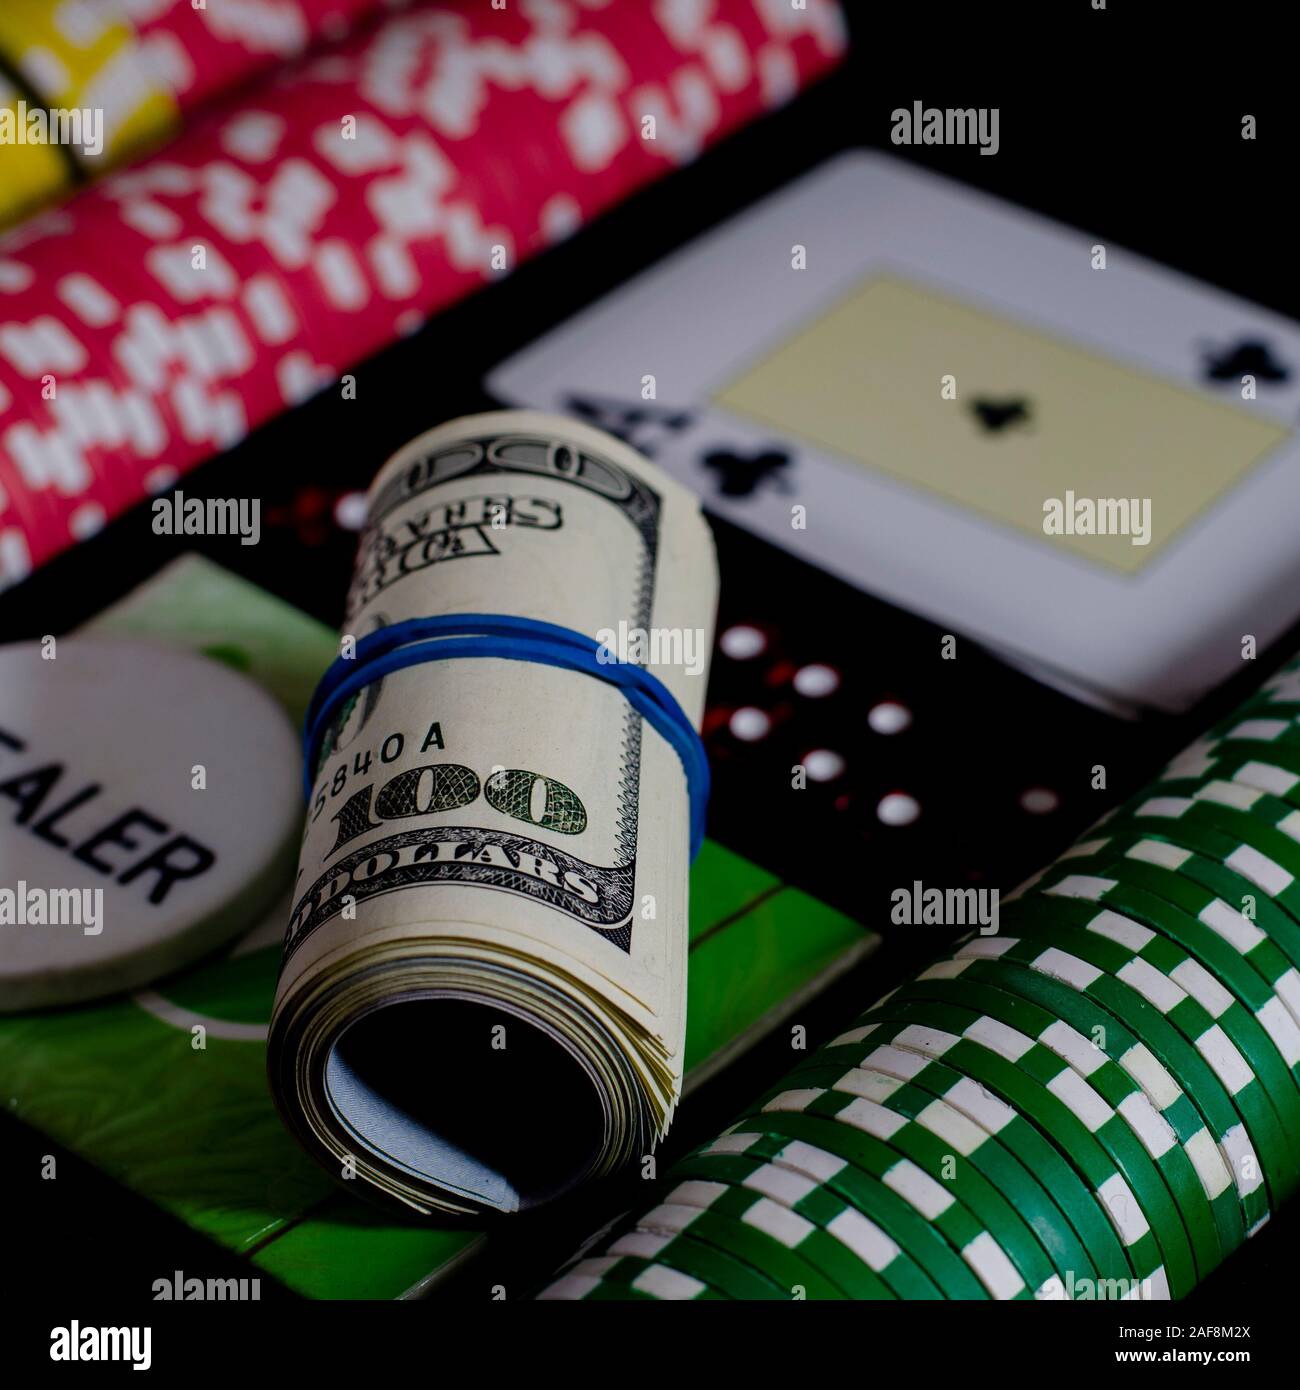 A 100 dollar kupurs is on the blackjack table next to poker chips and a dealer's chip Stock Photo